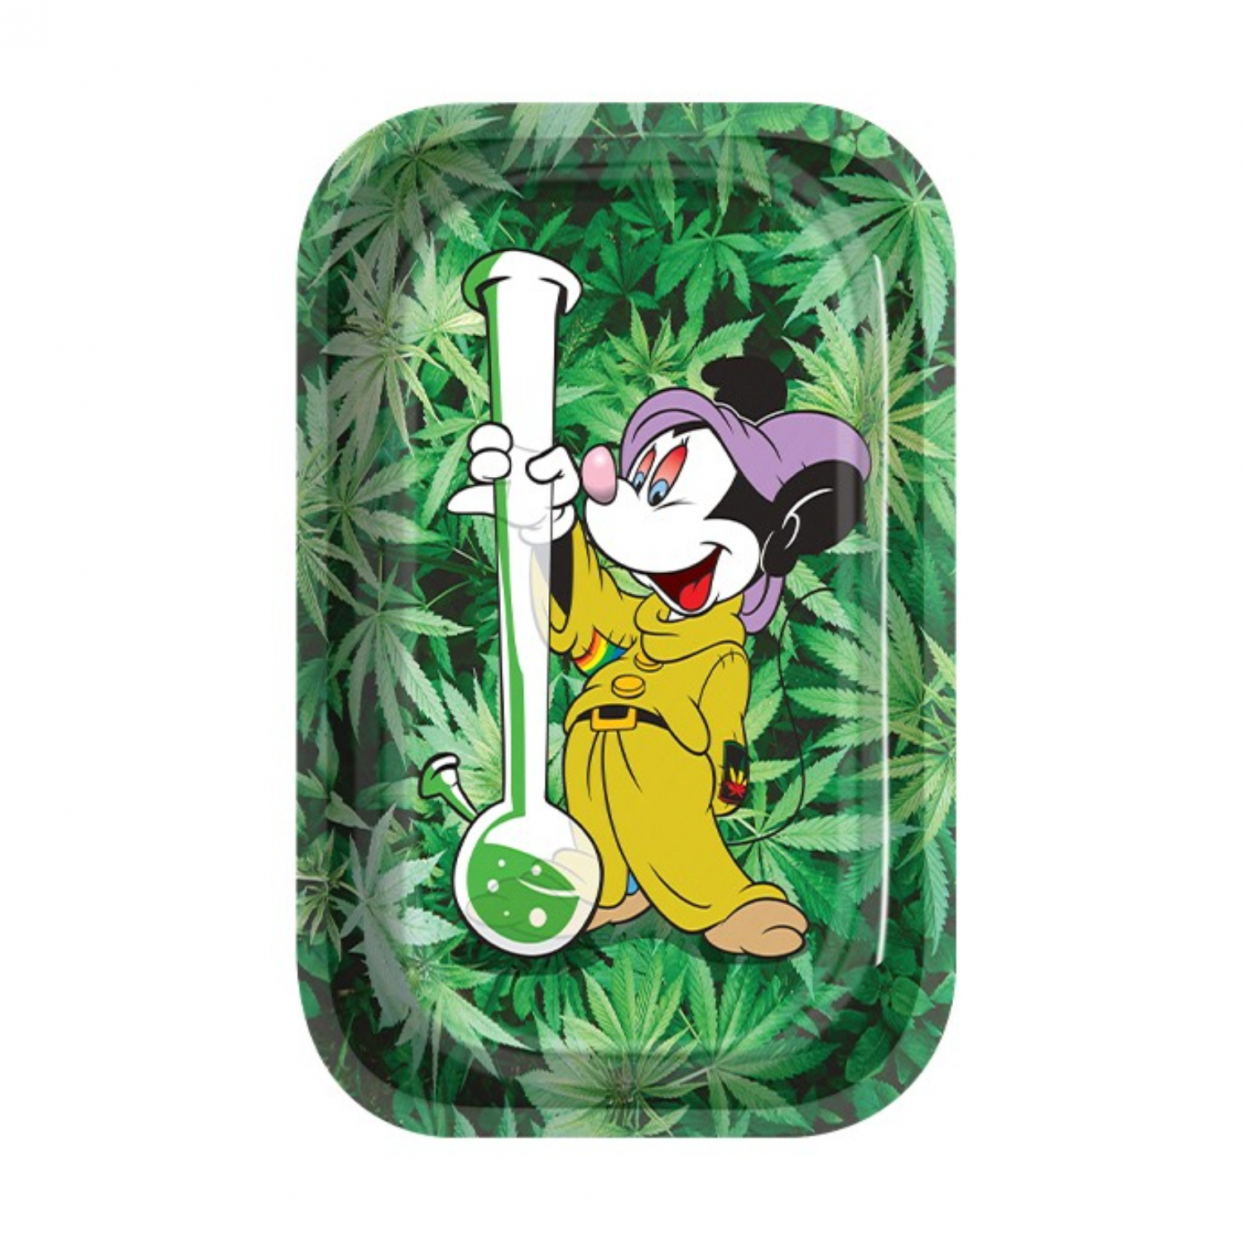 Metal Rolling Tray - Stoned Mouse - 29 x 19cm